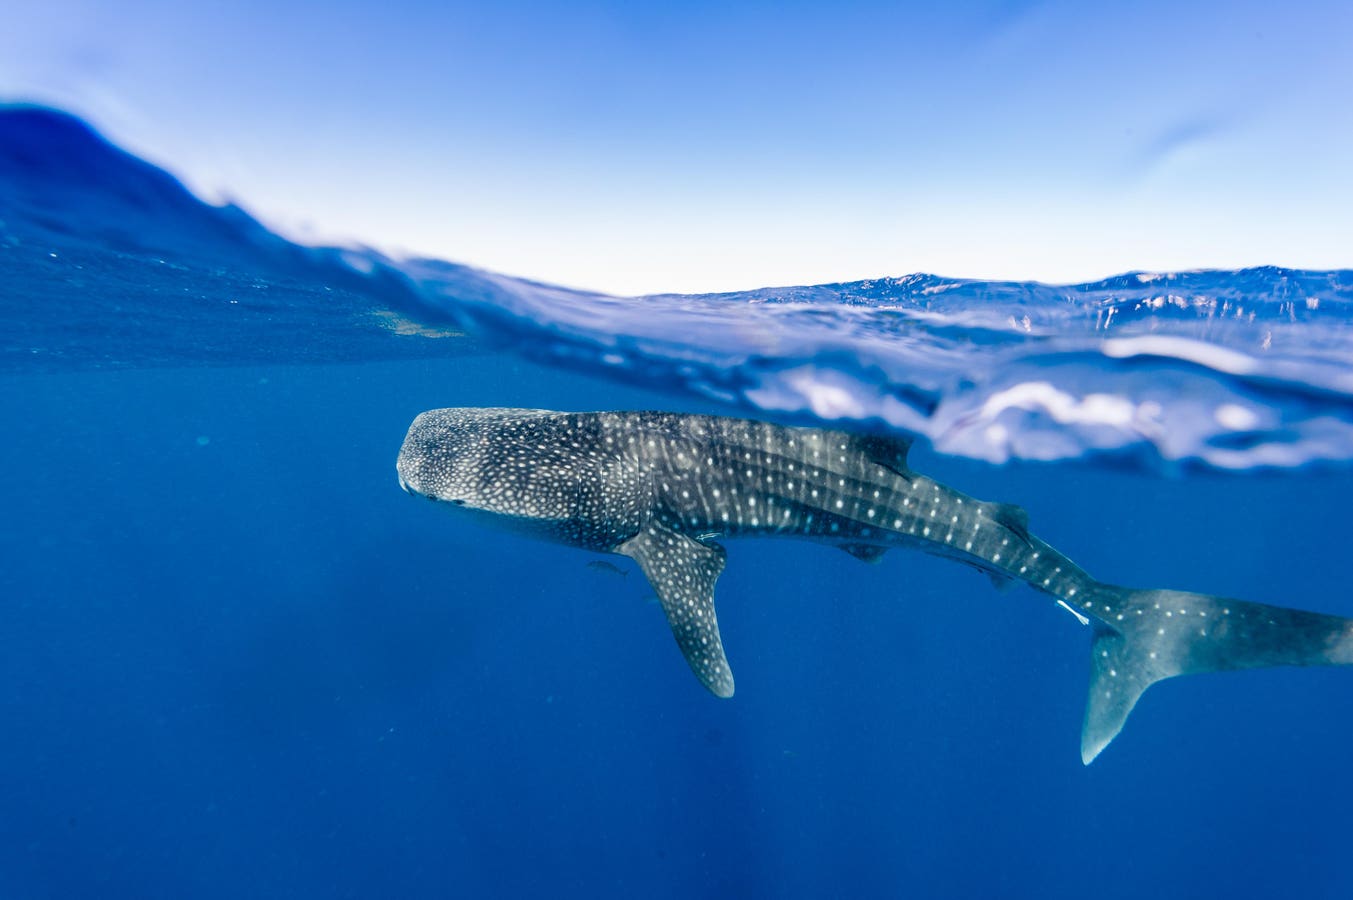 Unexpected Encounter With Whale Shark In Australia